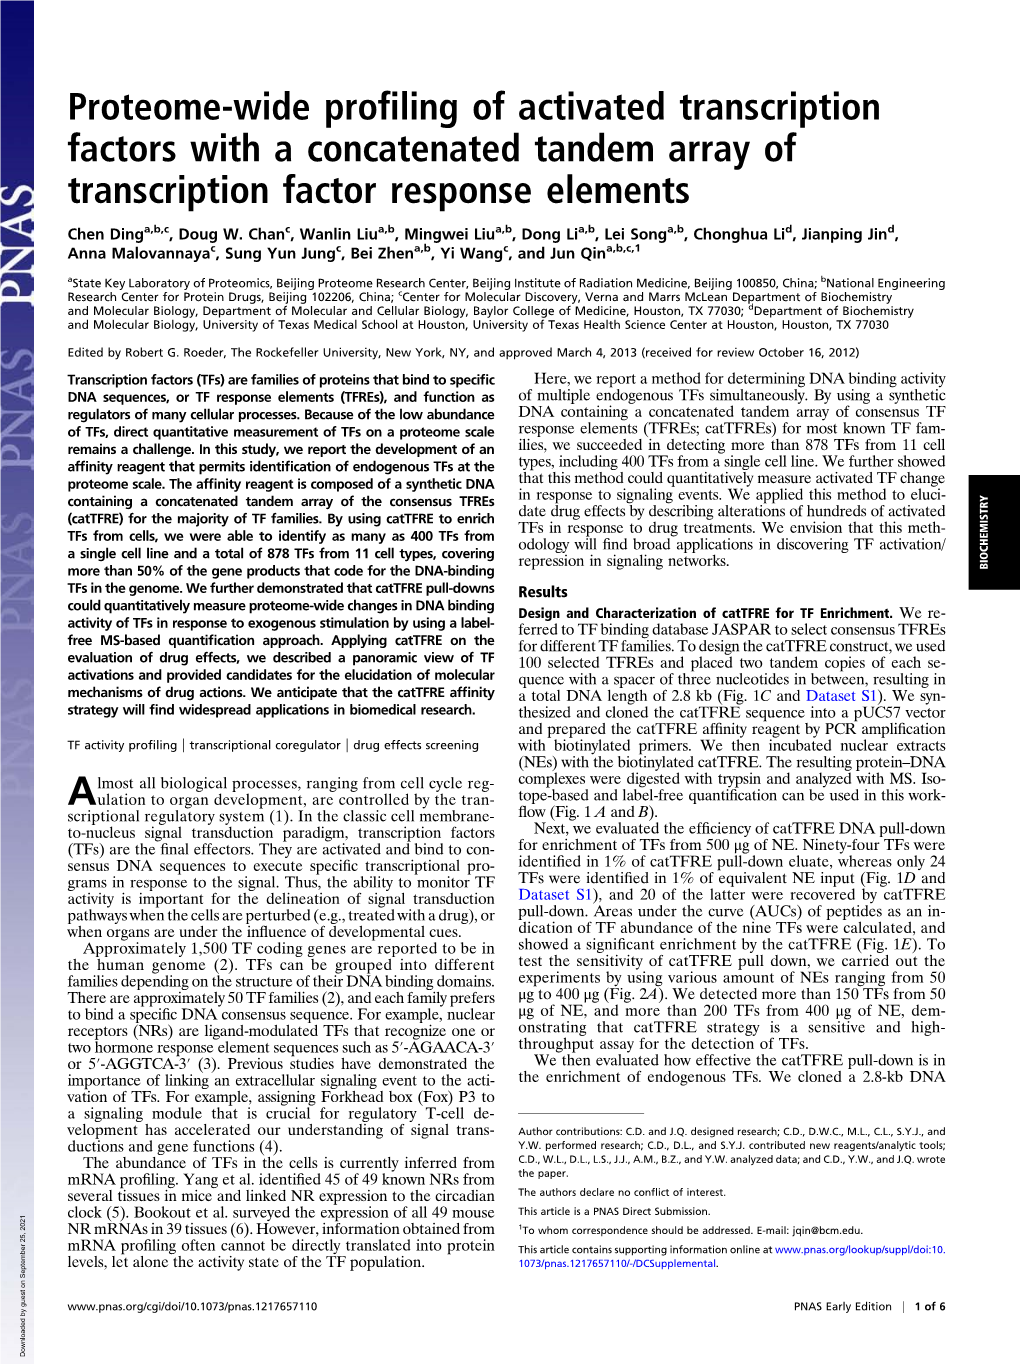 Proteome-Wide Profiling of Activated Transcription Factors with A